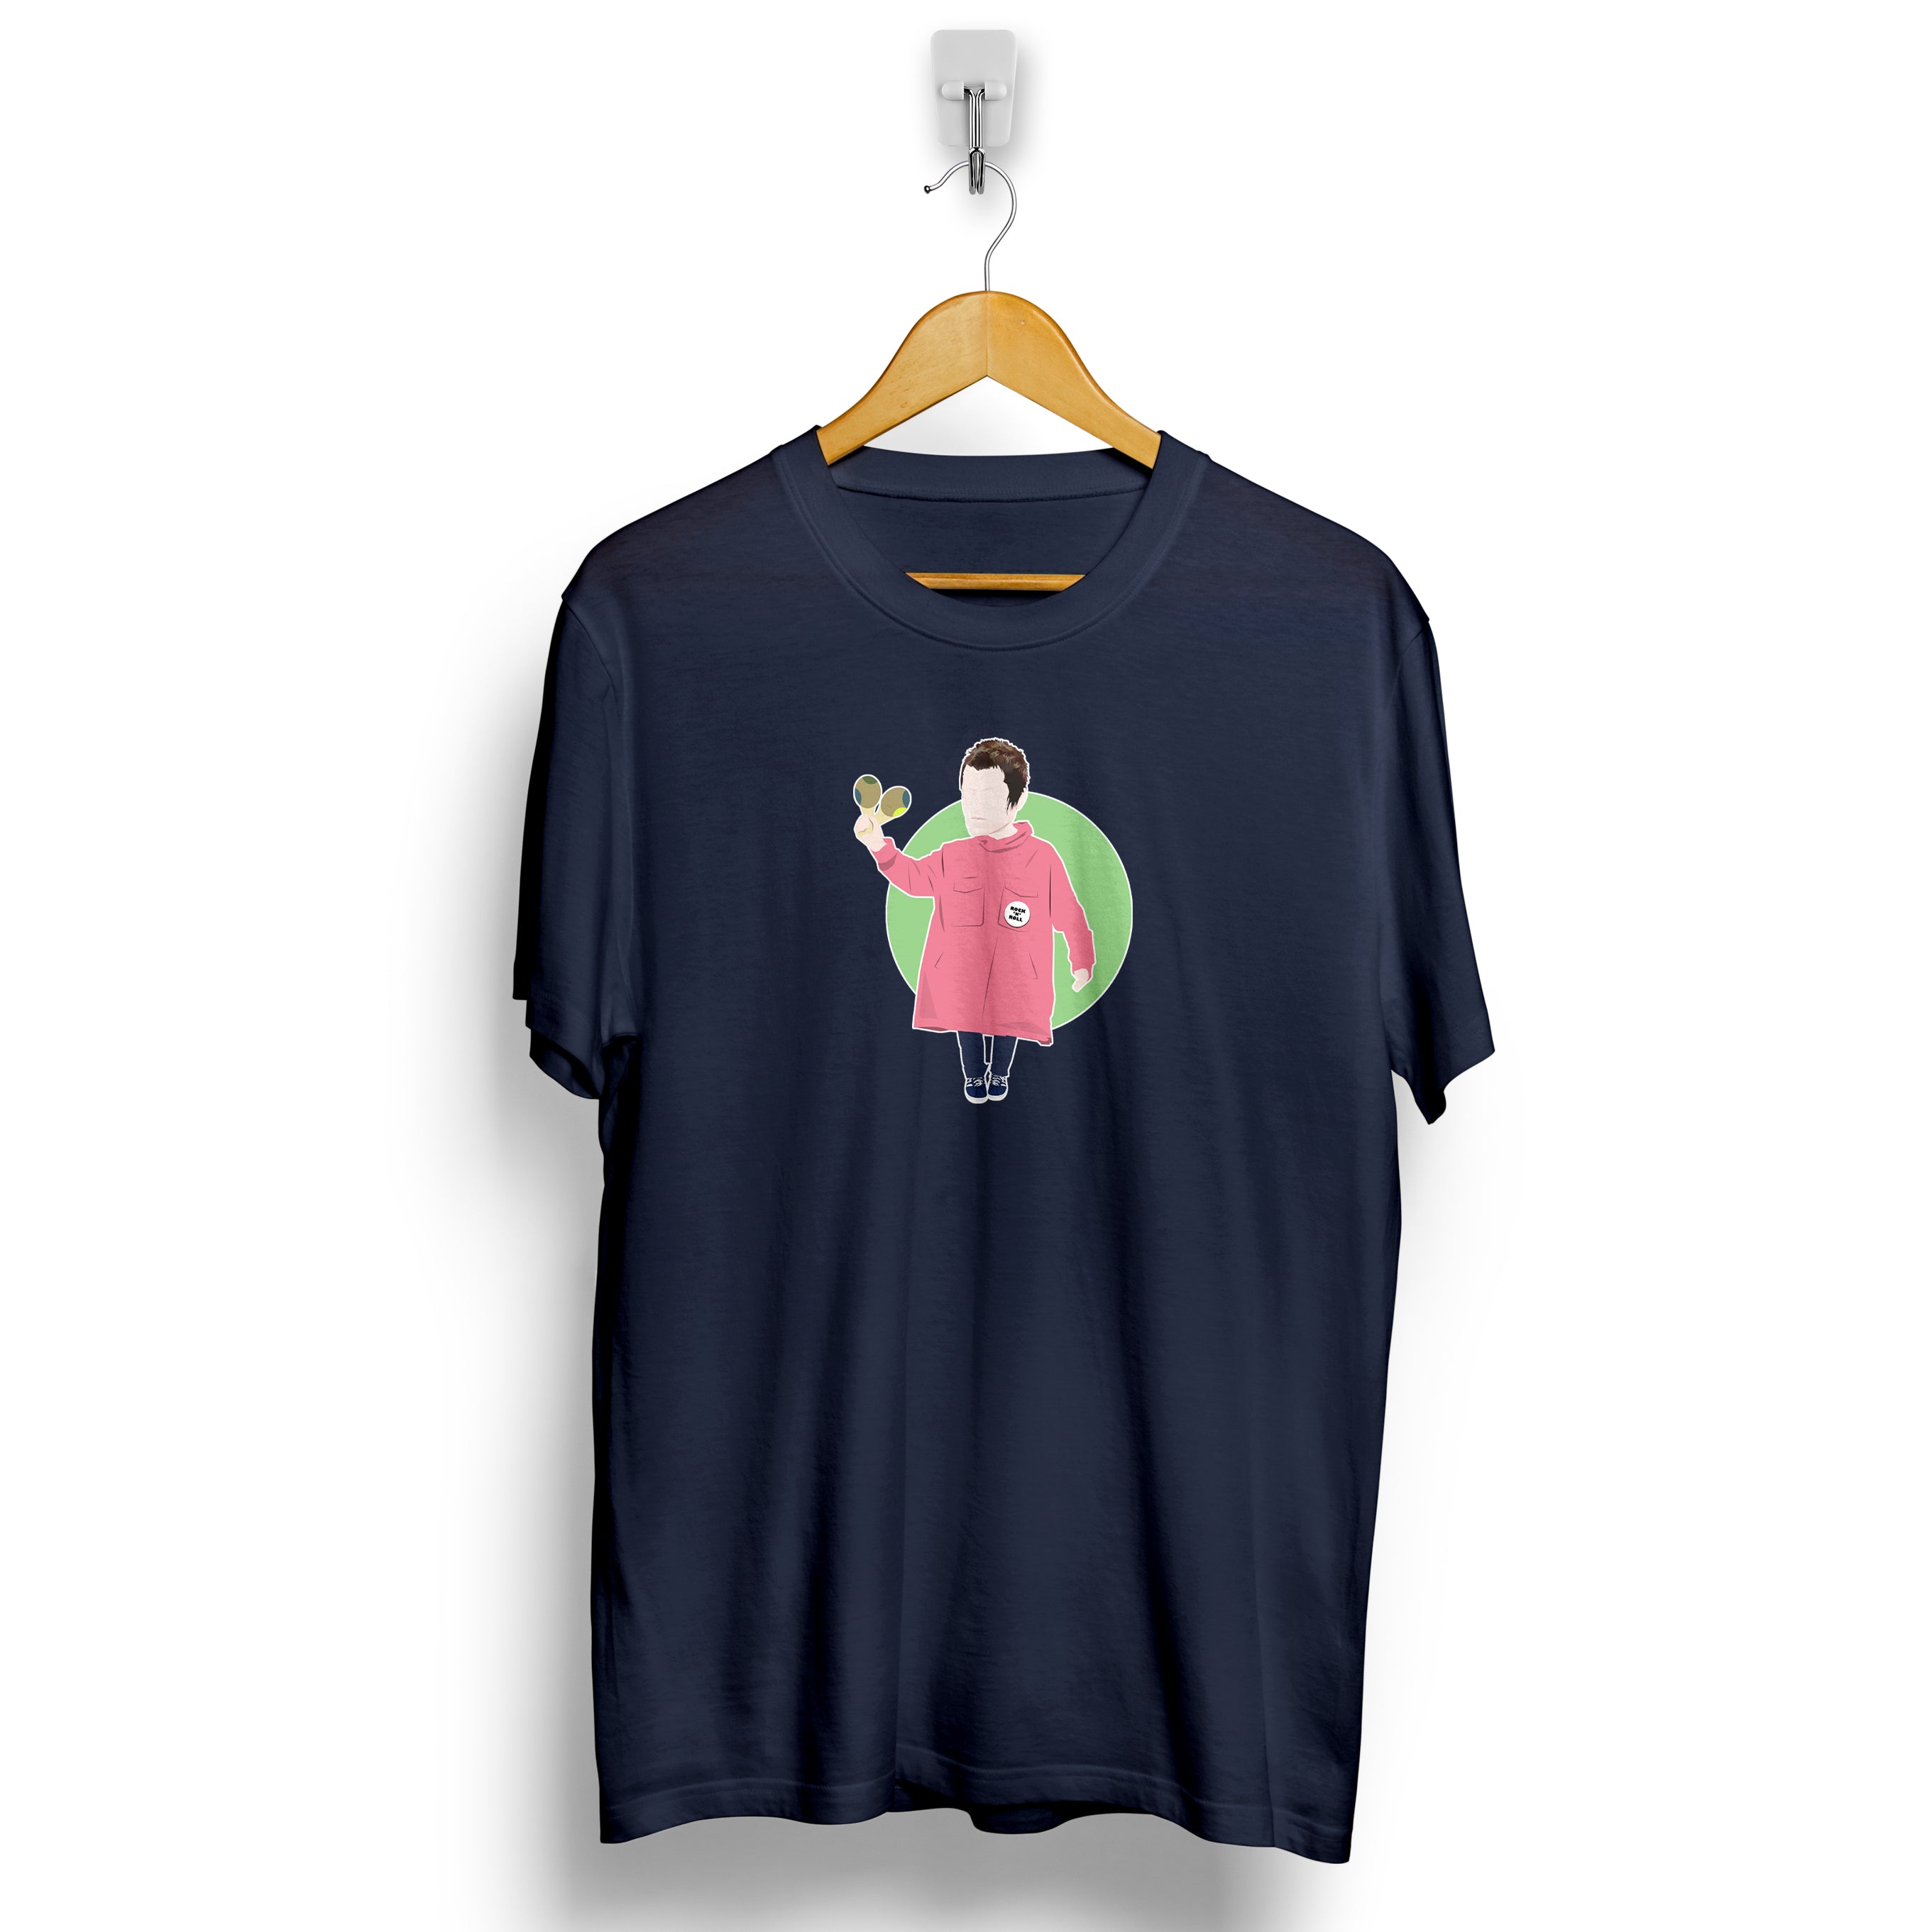 Liam Gallagher The Pink Parka T Shirt